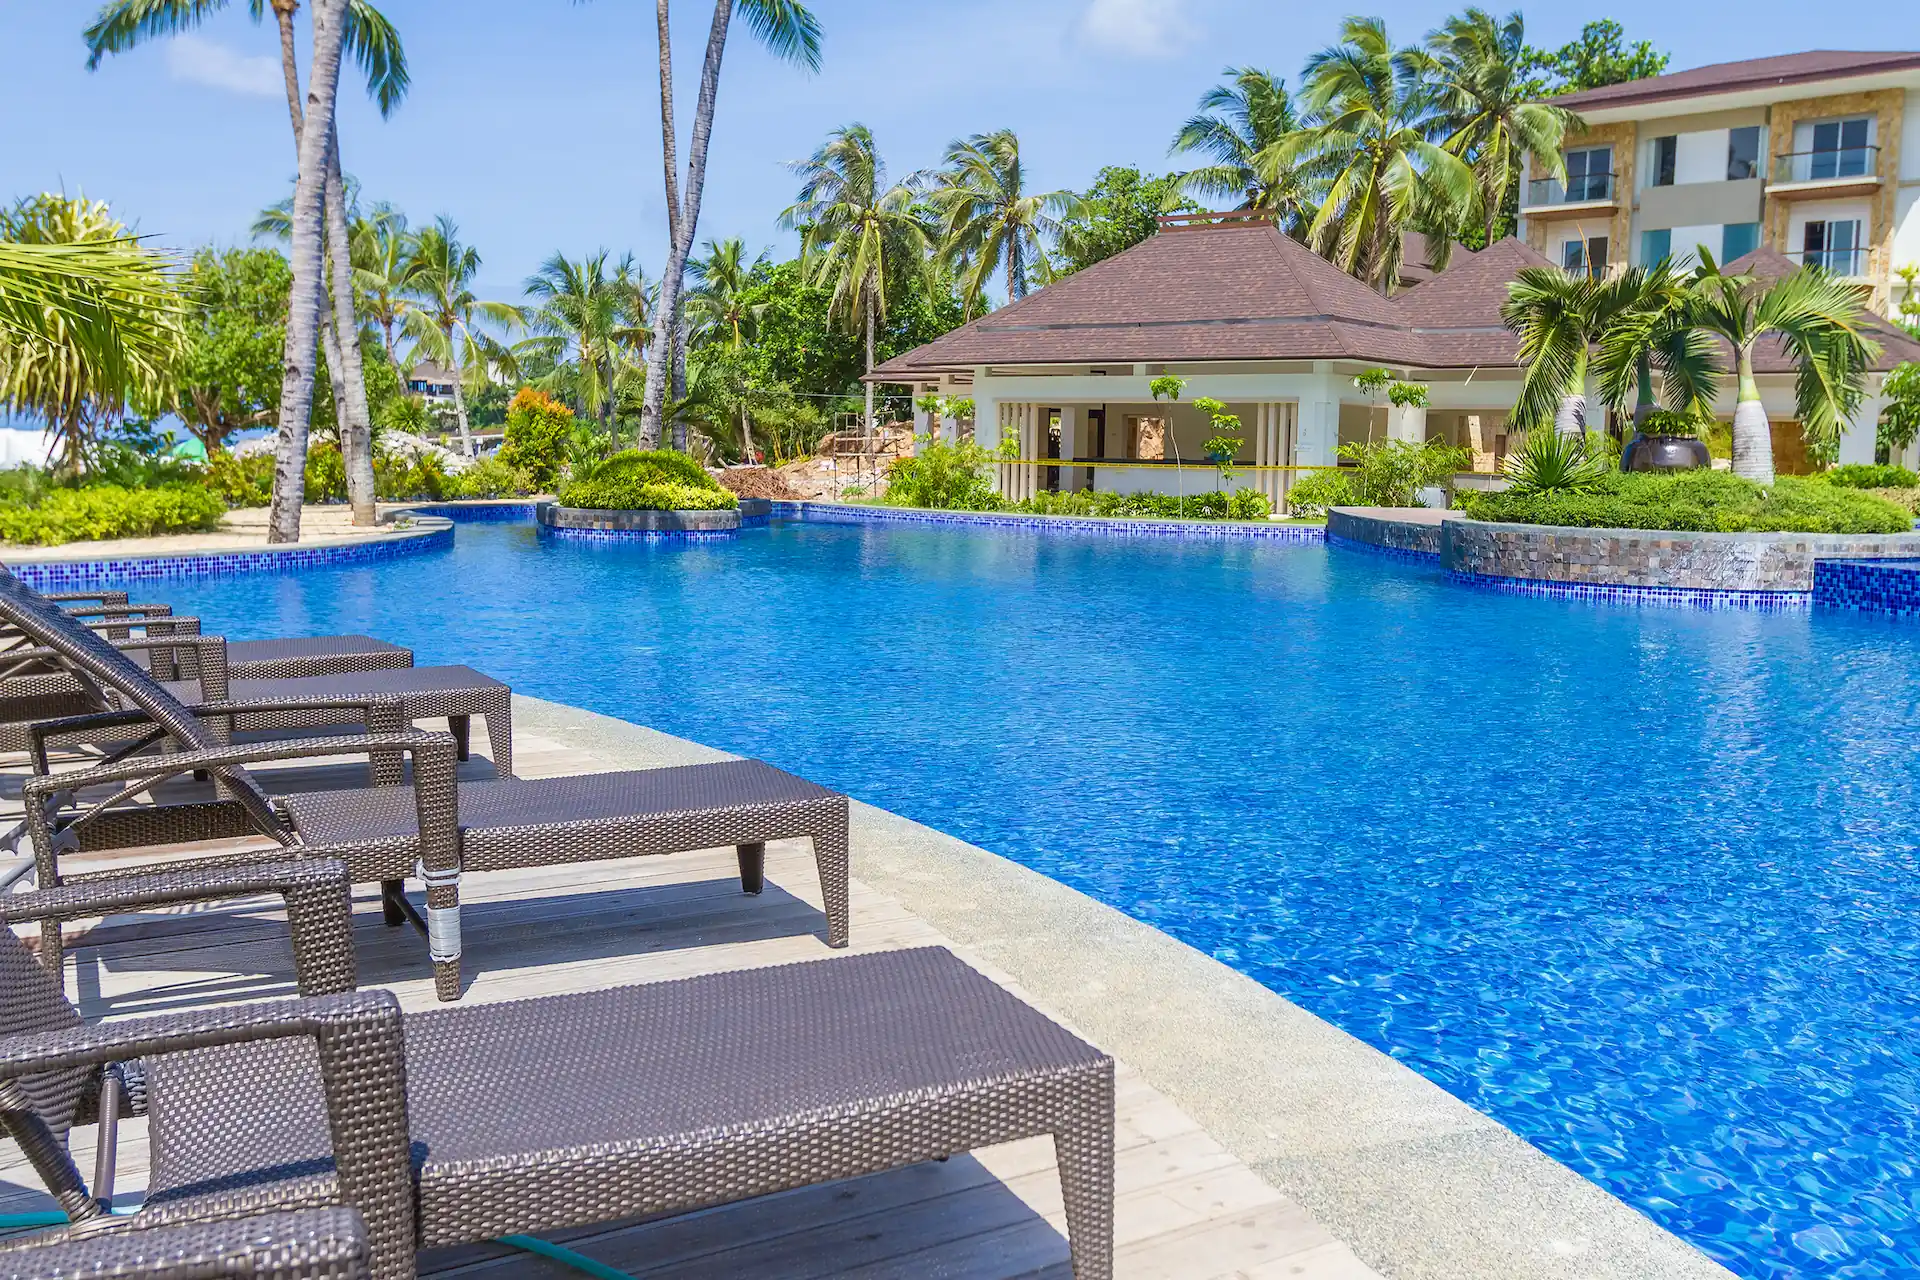 Daylight shot at the side of a large, inground resort pool. Increased business from the tourism sector is one of the trends likely to take hold in the pool industry in 2023.